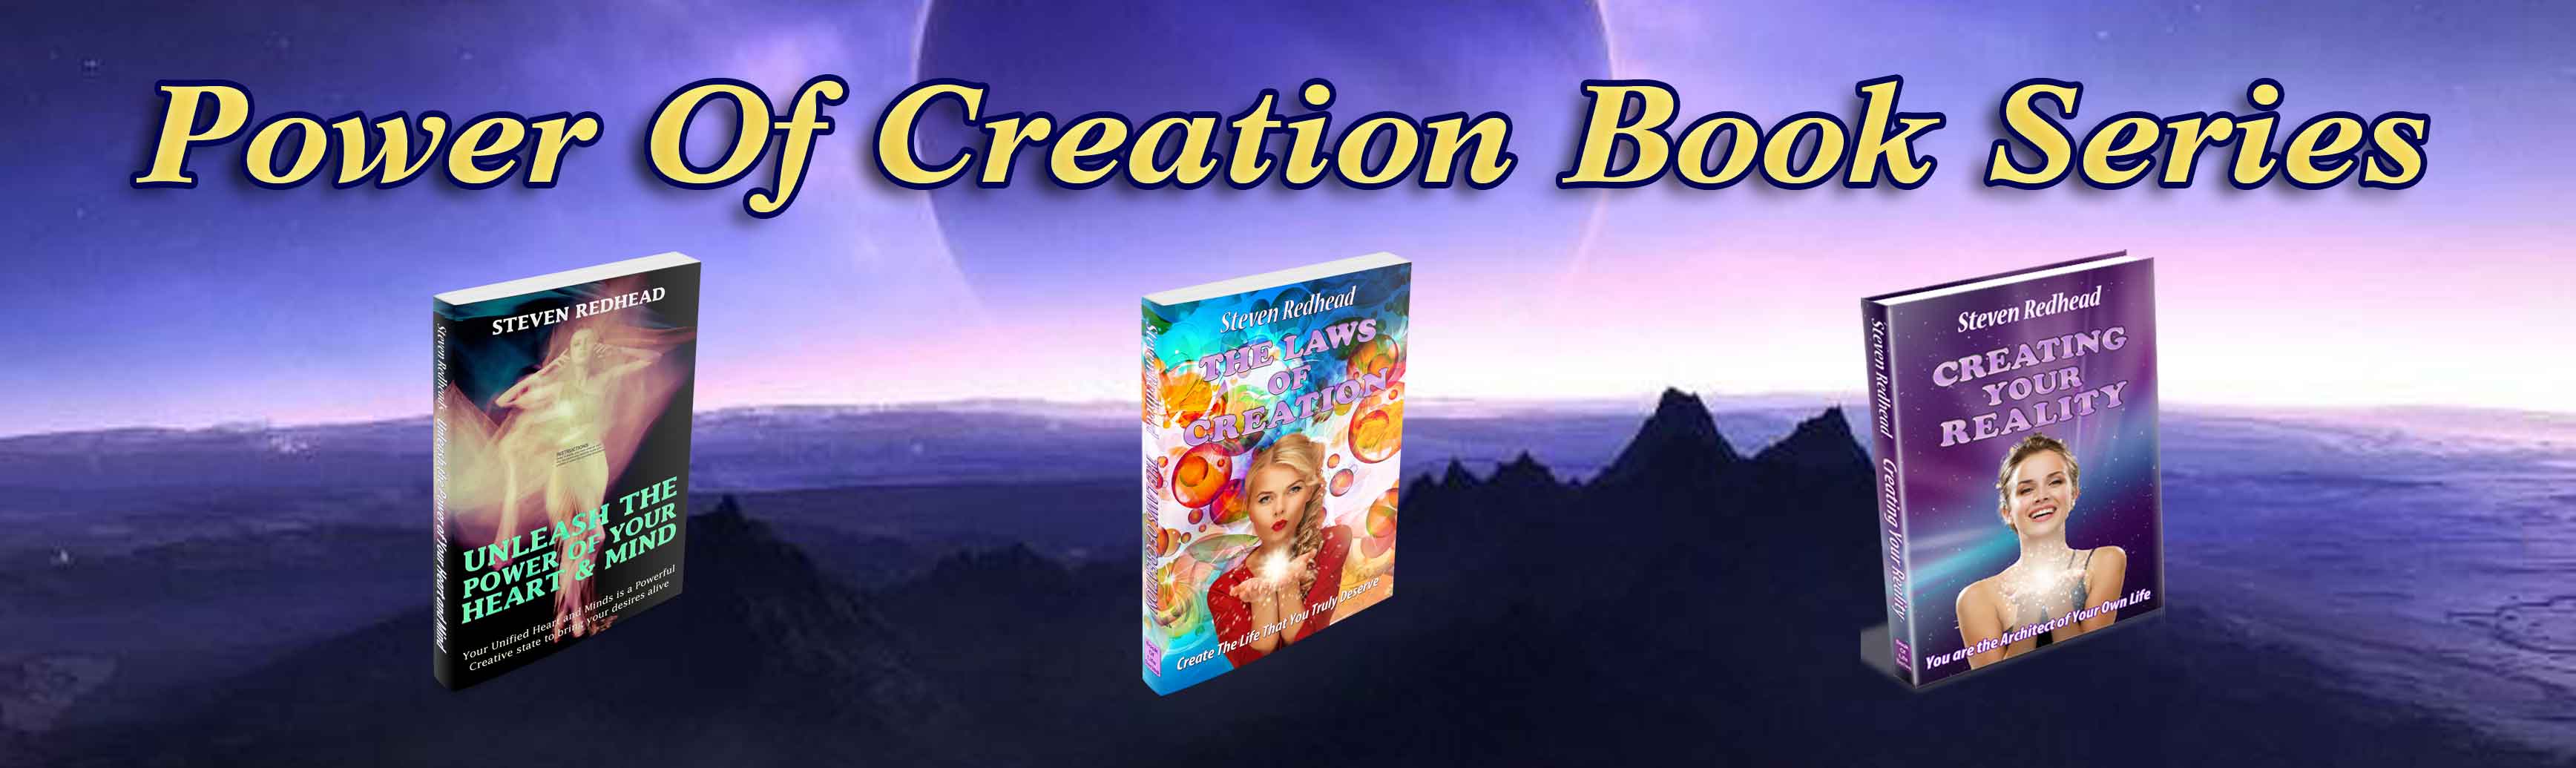 Powers Of Creation Books